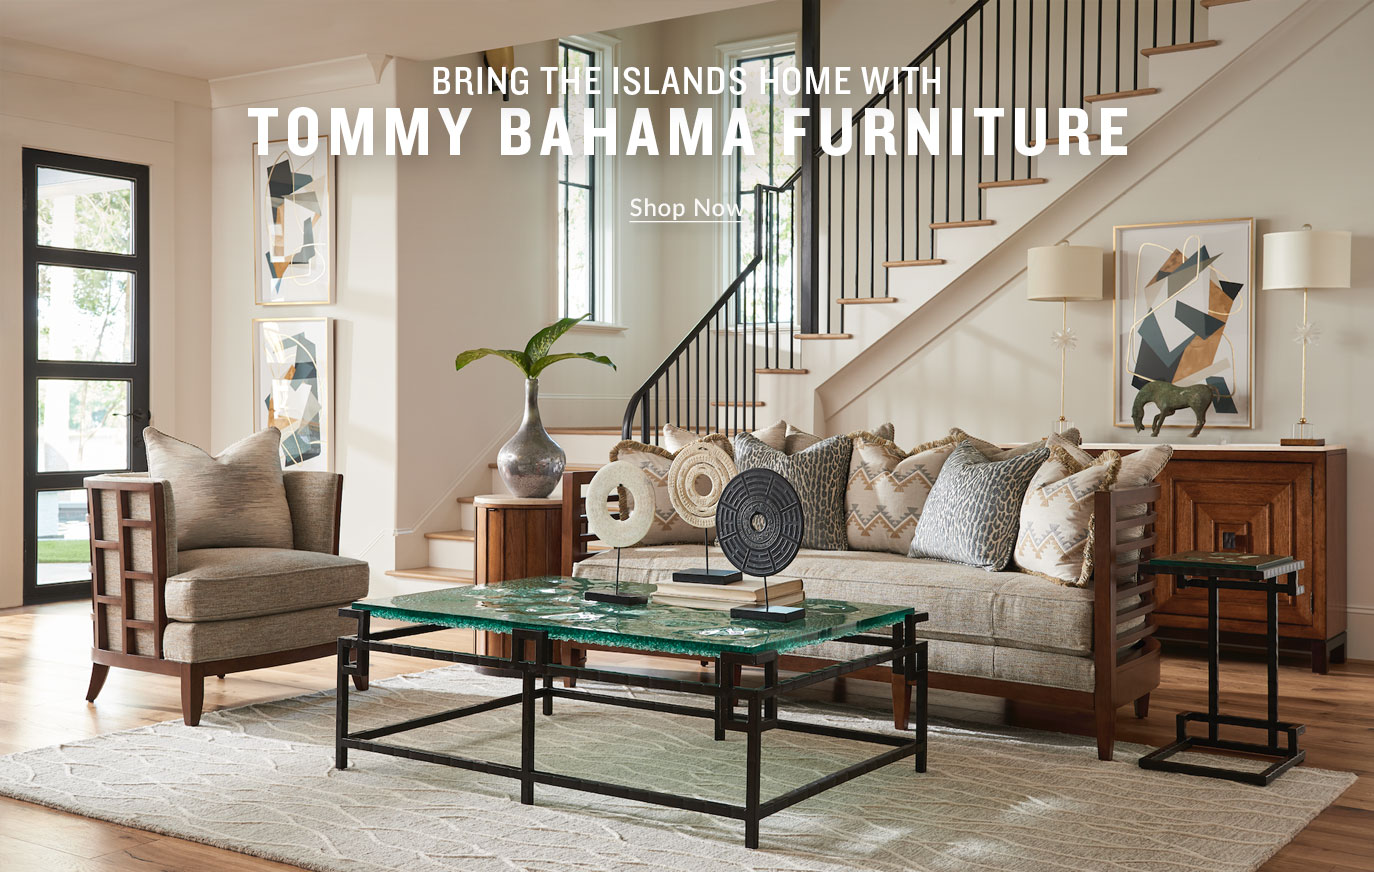 Bring The Islands Home With Tommy Bahama Furniture